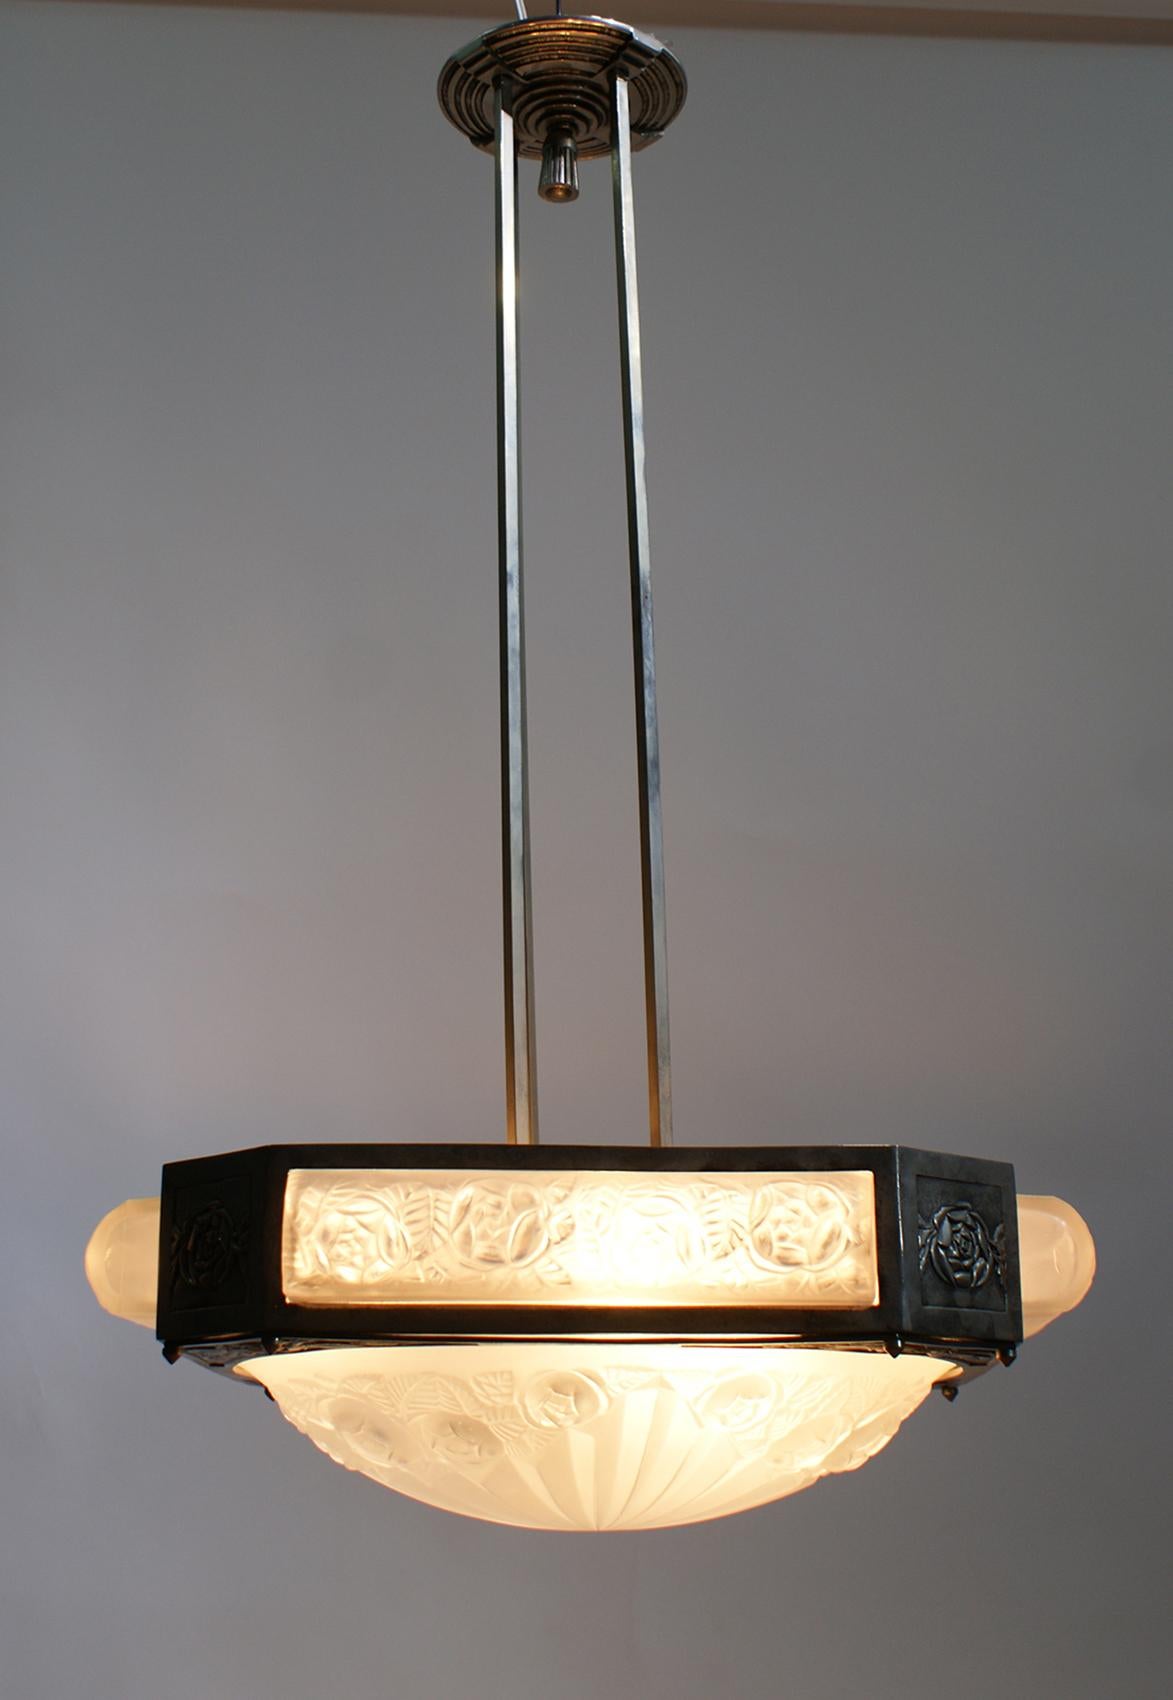 Stunning French Art Deco chandelier created by the French artist Degué. In a square nickel bronze frame embracing a center coupe marked Degué, with four matching oblong shades marked with numbers “501”. All shades are in clear frosted glass with